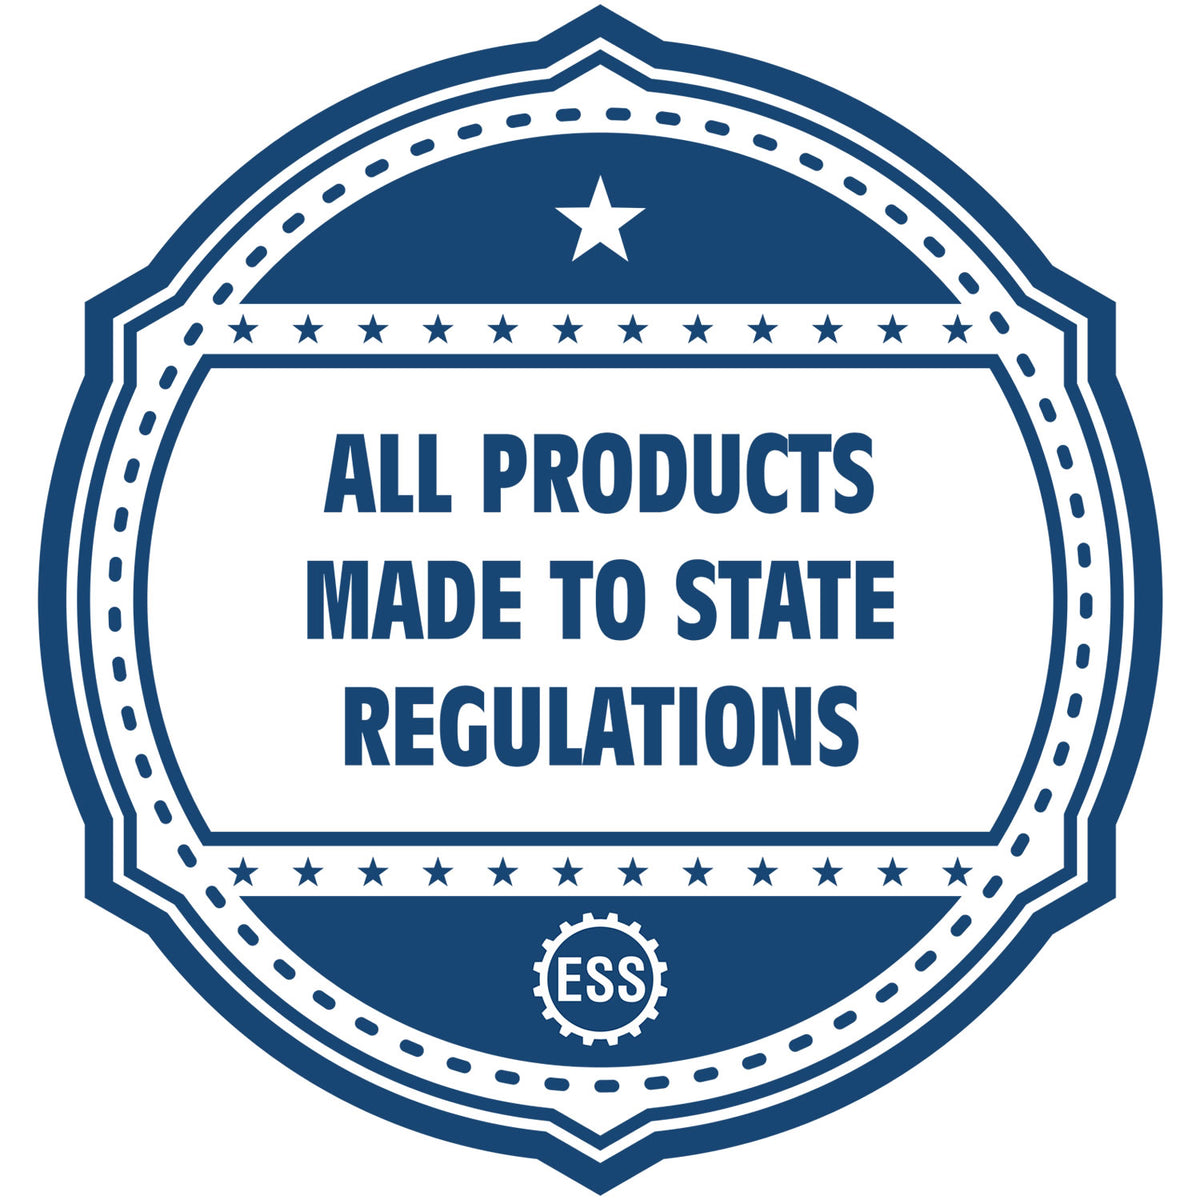 An icon or badge element for the Heavy-Duty Massachusetts Rectangular Notary Stamp showing that this product is made in compliance with state regulations.